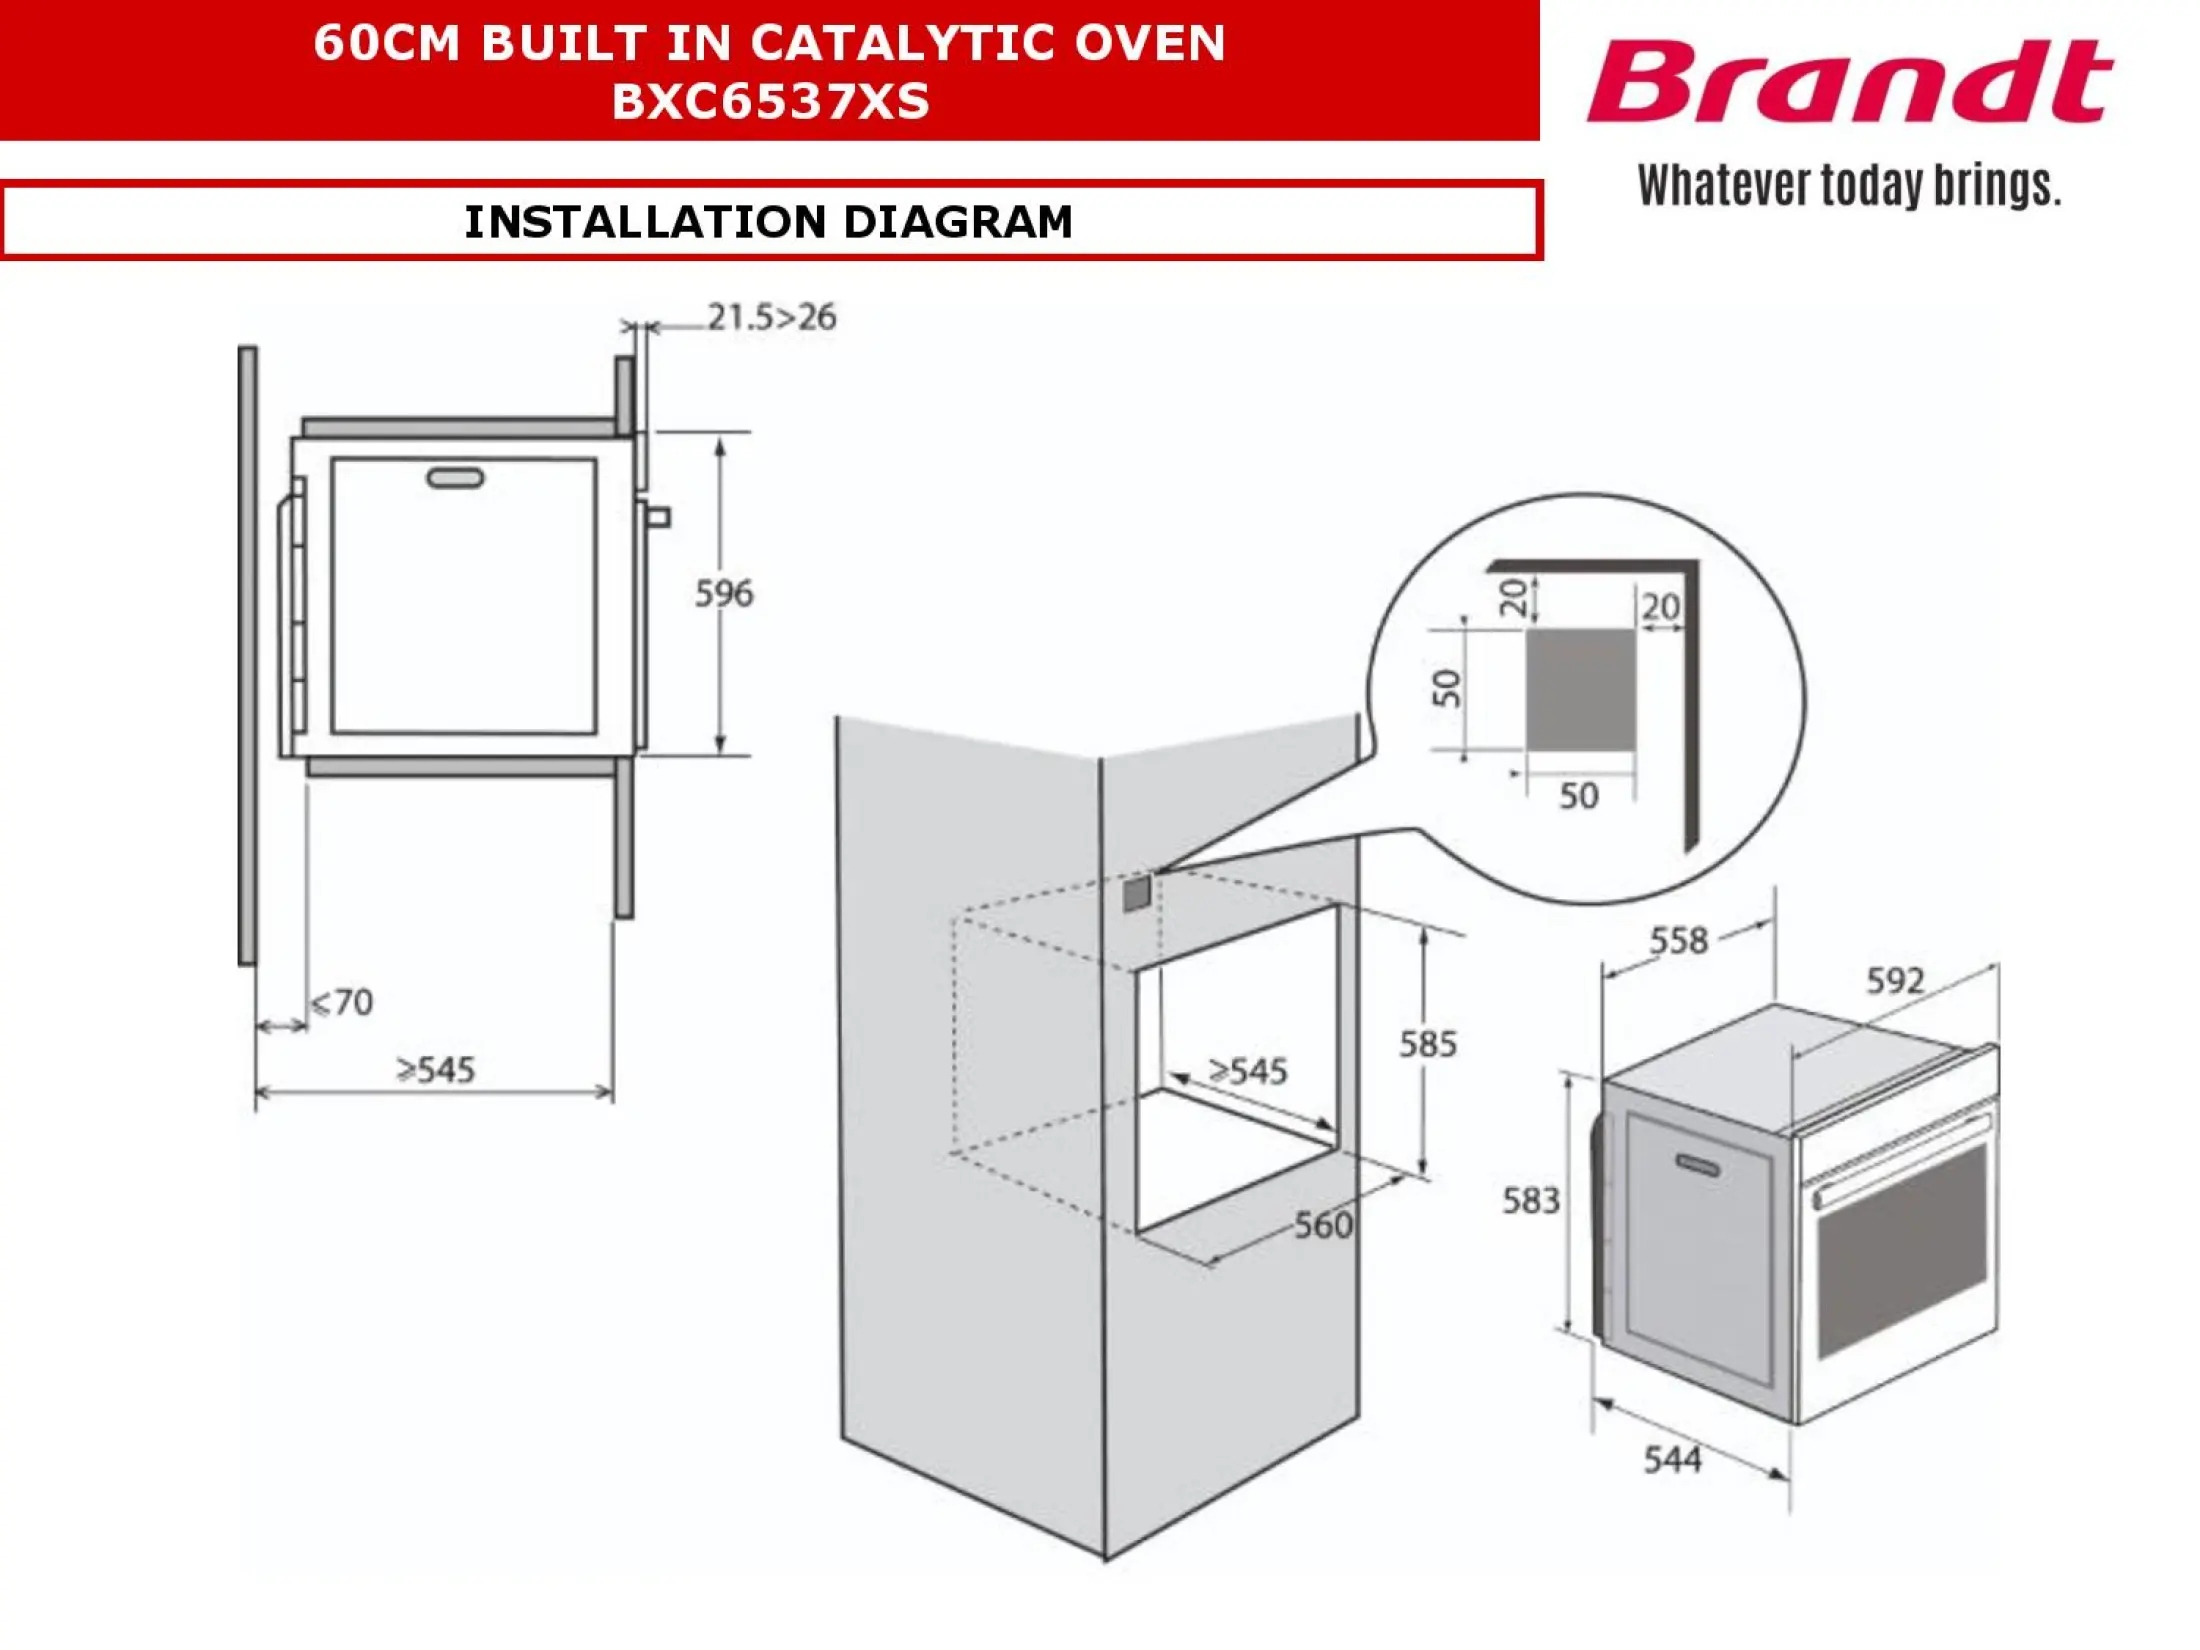 Ready Stock &amp; Fast Ship) Brandt 73L Built-in Catalytic Oven BXC6537XS |  Lazada